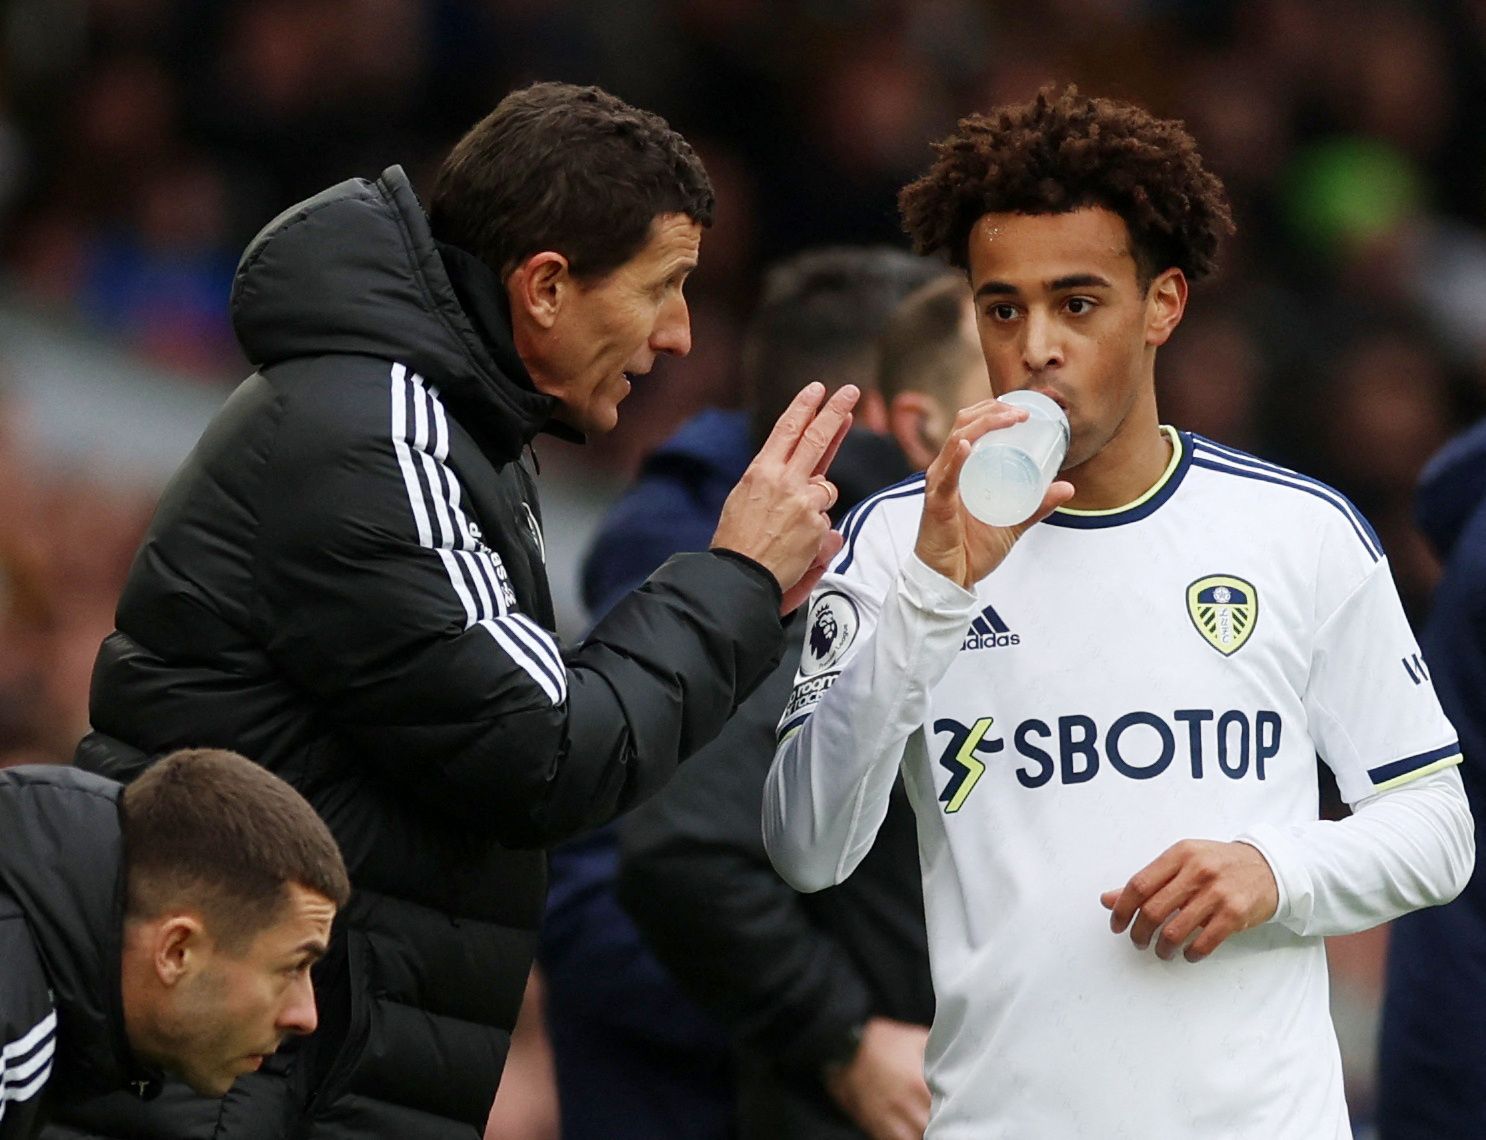 Soccer Football - Premier League - Leeds United v Southampton - Elland Road, Leeds, Britain - February 25, 2023 Leeds United manager Javi Gracia talks to Tyler Adams Action Images via Reuters/Lee Smith EDITORIAL USE ONLY. No use with unauthorized audio, video, data, fixture lists, club/league logos or 'live' services. Online in-match use limited to 75 images, no video emulation. No use in betting, games or single club /league/player publications.  Please contact your account representative for f